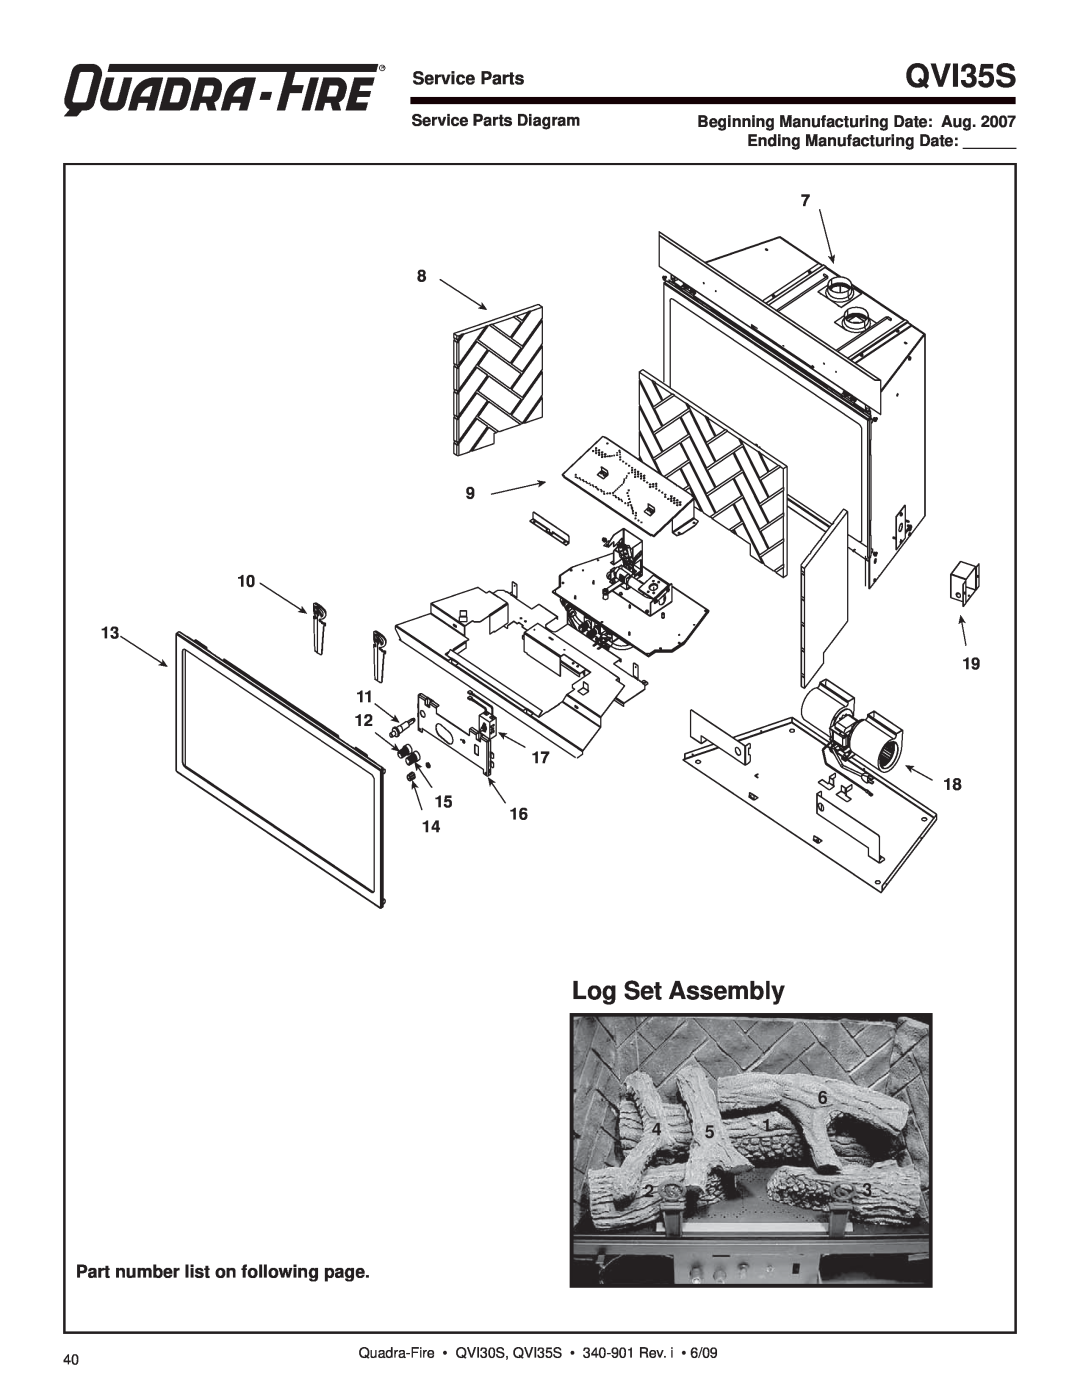 Quadra-Fire QVI35S Log Set Assembly, Service Parts Diagram, Beginning Manufacturing Date Aug, Ending Manufacturing Date 